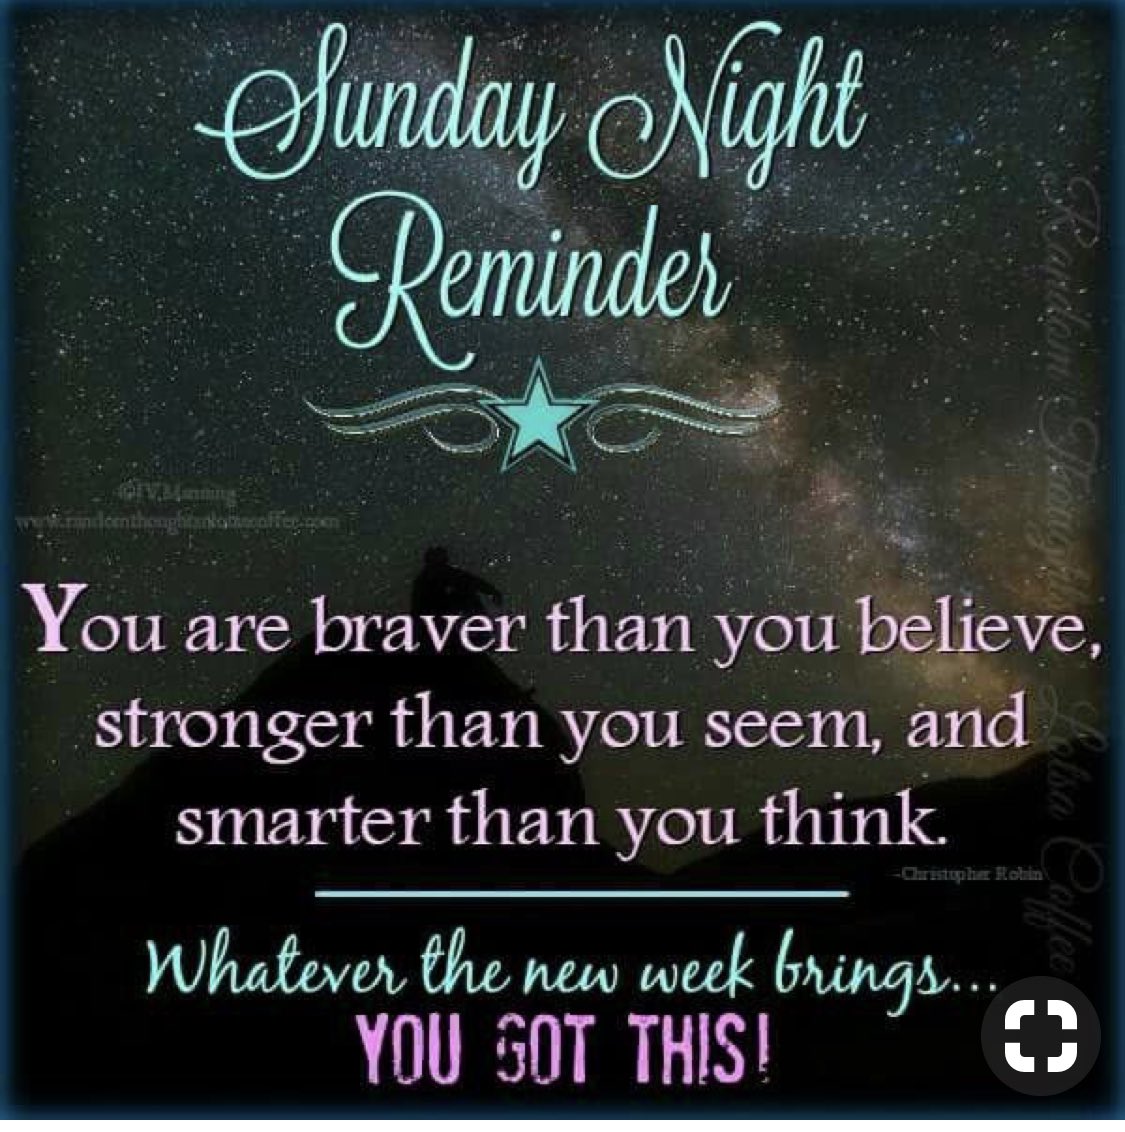 Here’s your #sundaynightreminder ❤️🙌🏼🙌🏿🙌🏽🙌🏾🙌🏻🙌 @UFT @UFTMS_Division @UFTSafety @UFTParas @UFTTeamHS 
#uftnyc #unionstrong #unionproud #elementaryteachers #proudteachers #proudparas #proudguidancecounselors #proudsocialworkers #proudserviceproviders #publicschoolproudnyc